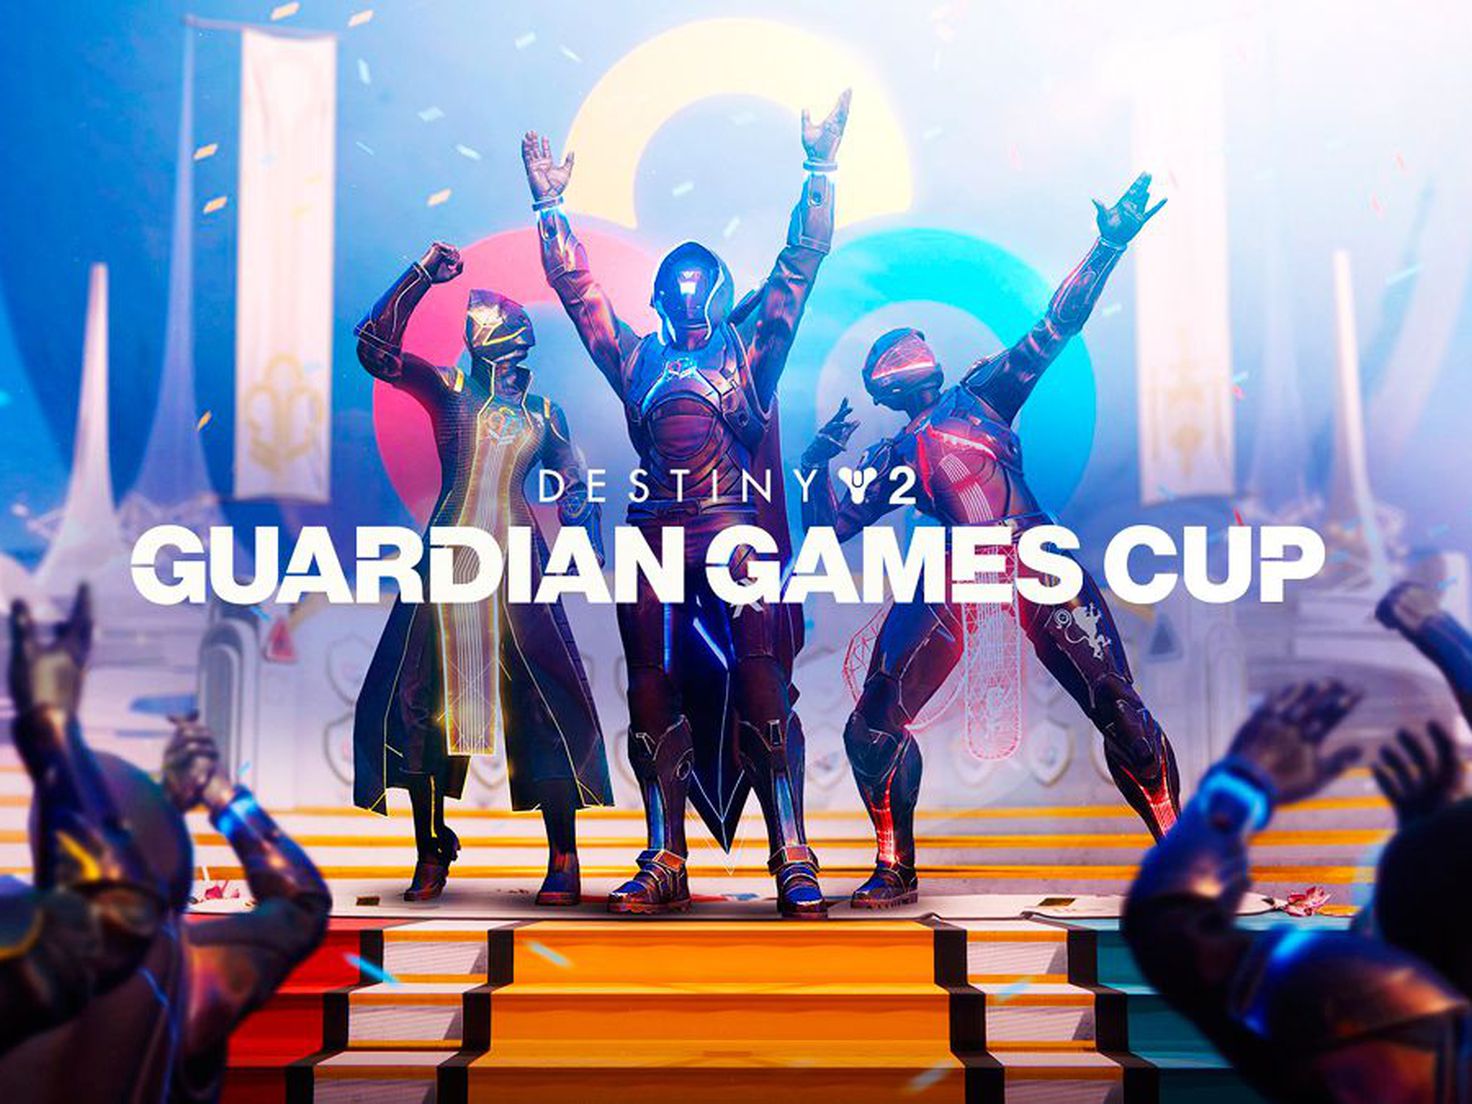 Today begins the Game of Guardians event in Destiny 2